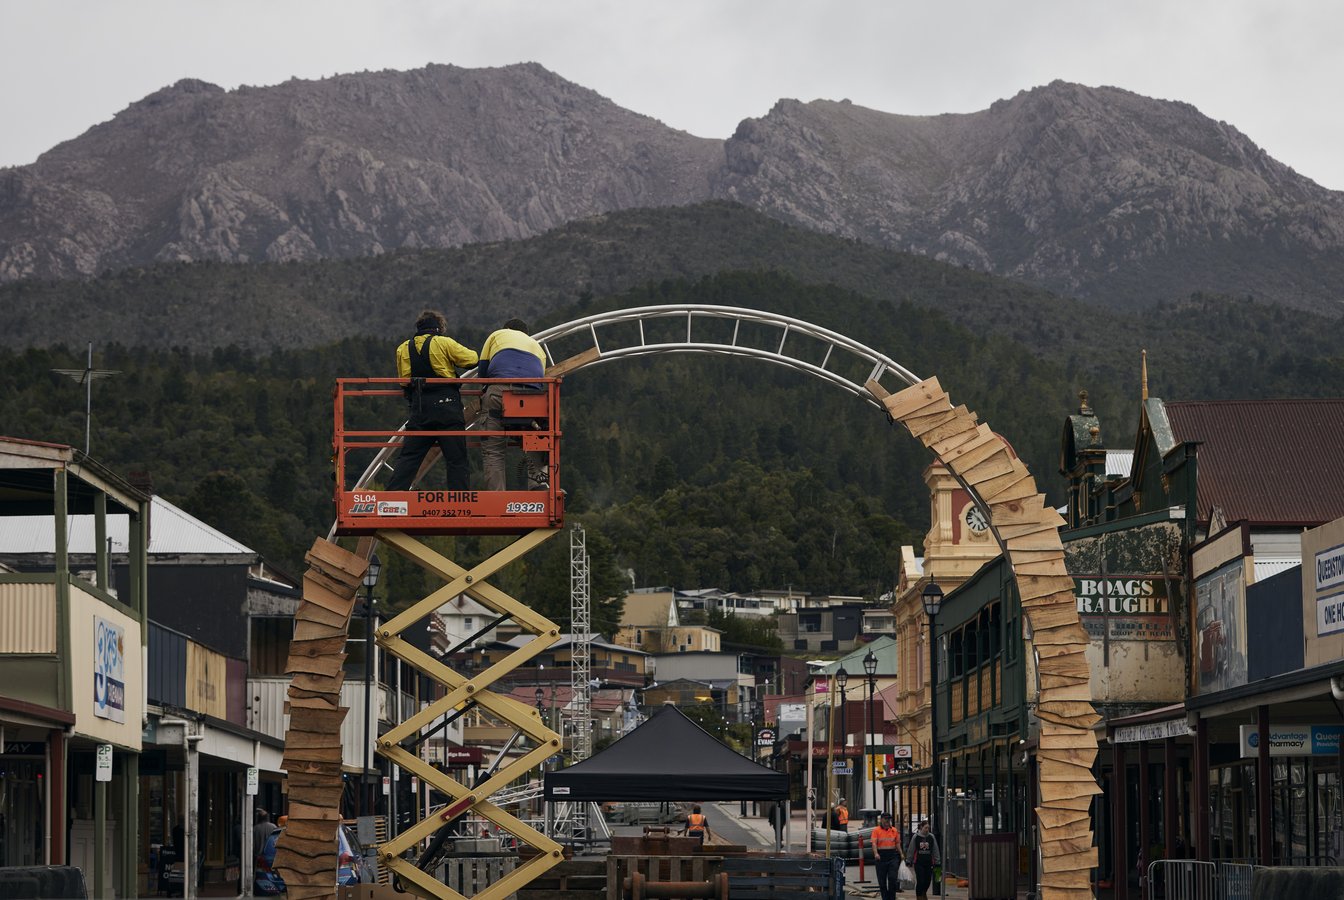 Two workers in high visibility clothing constructing the archway entrance to Crib Road.